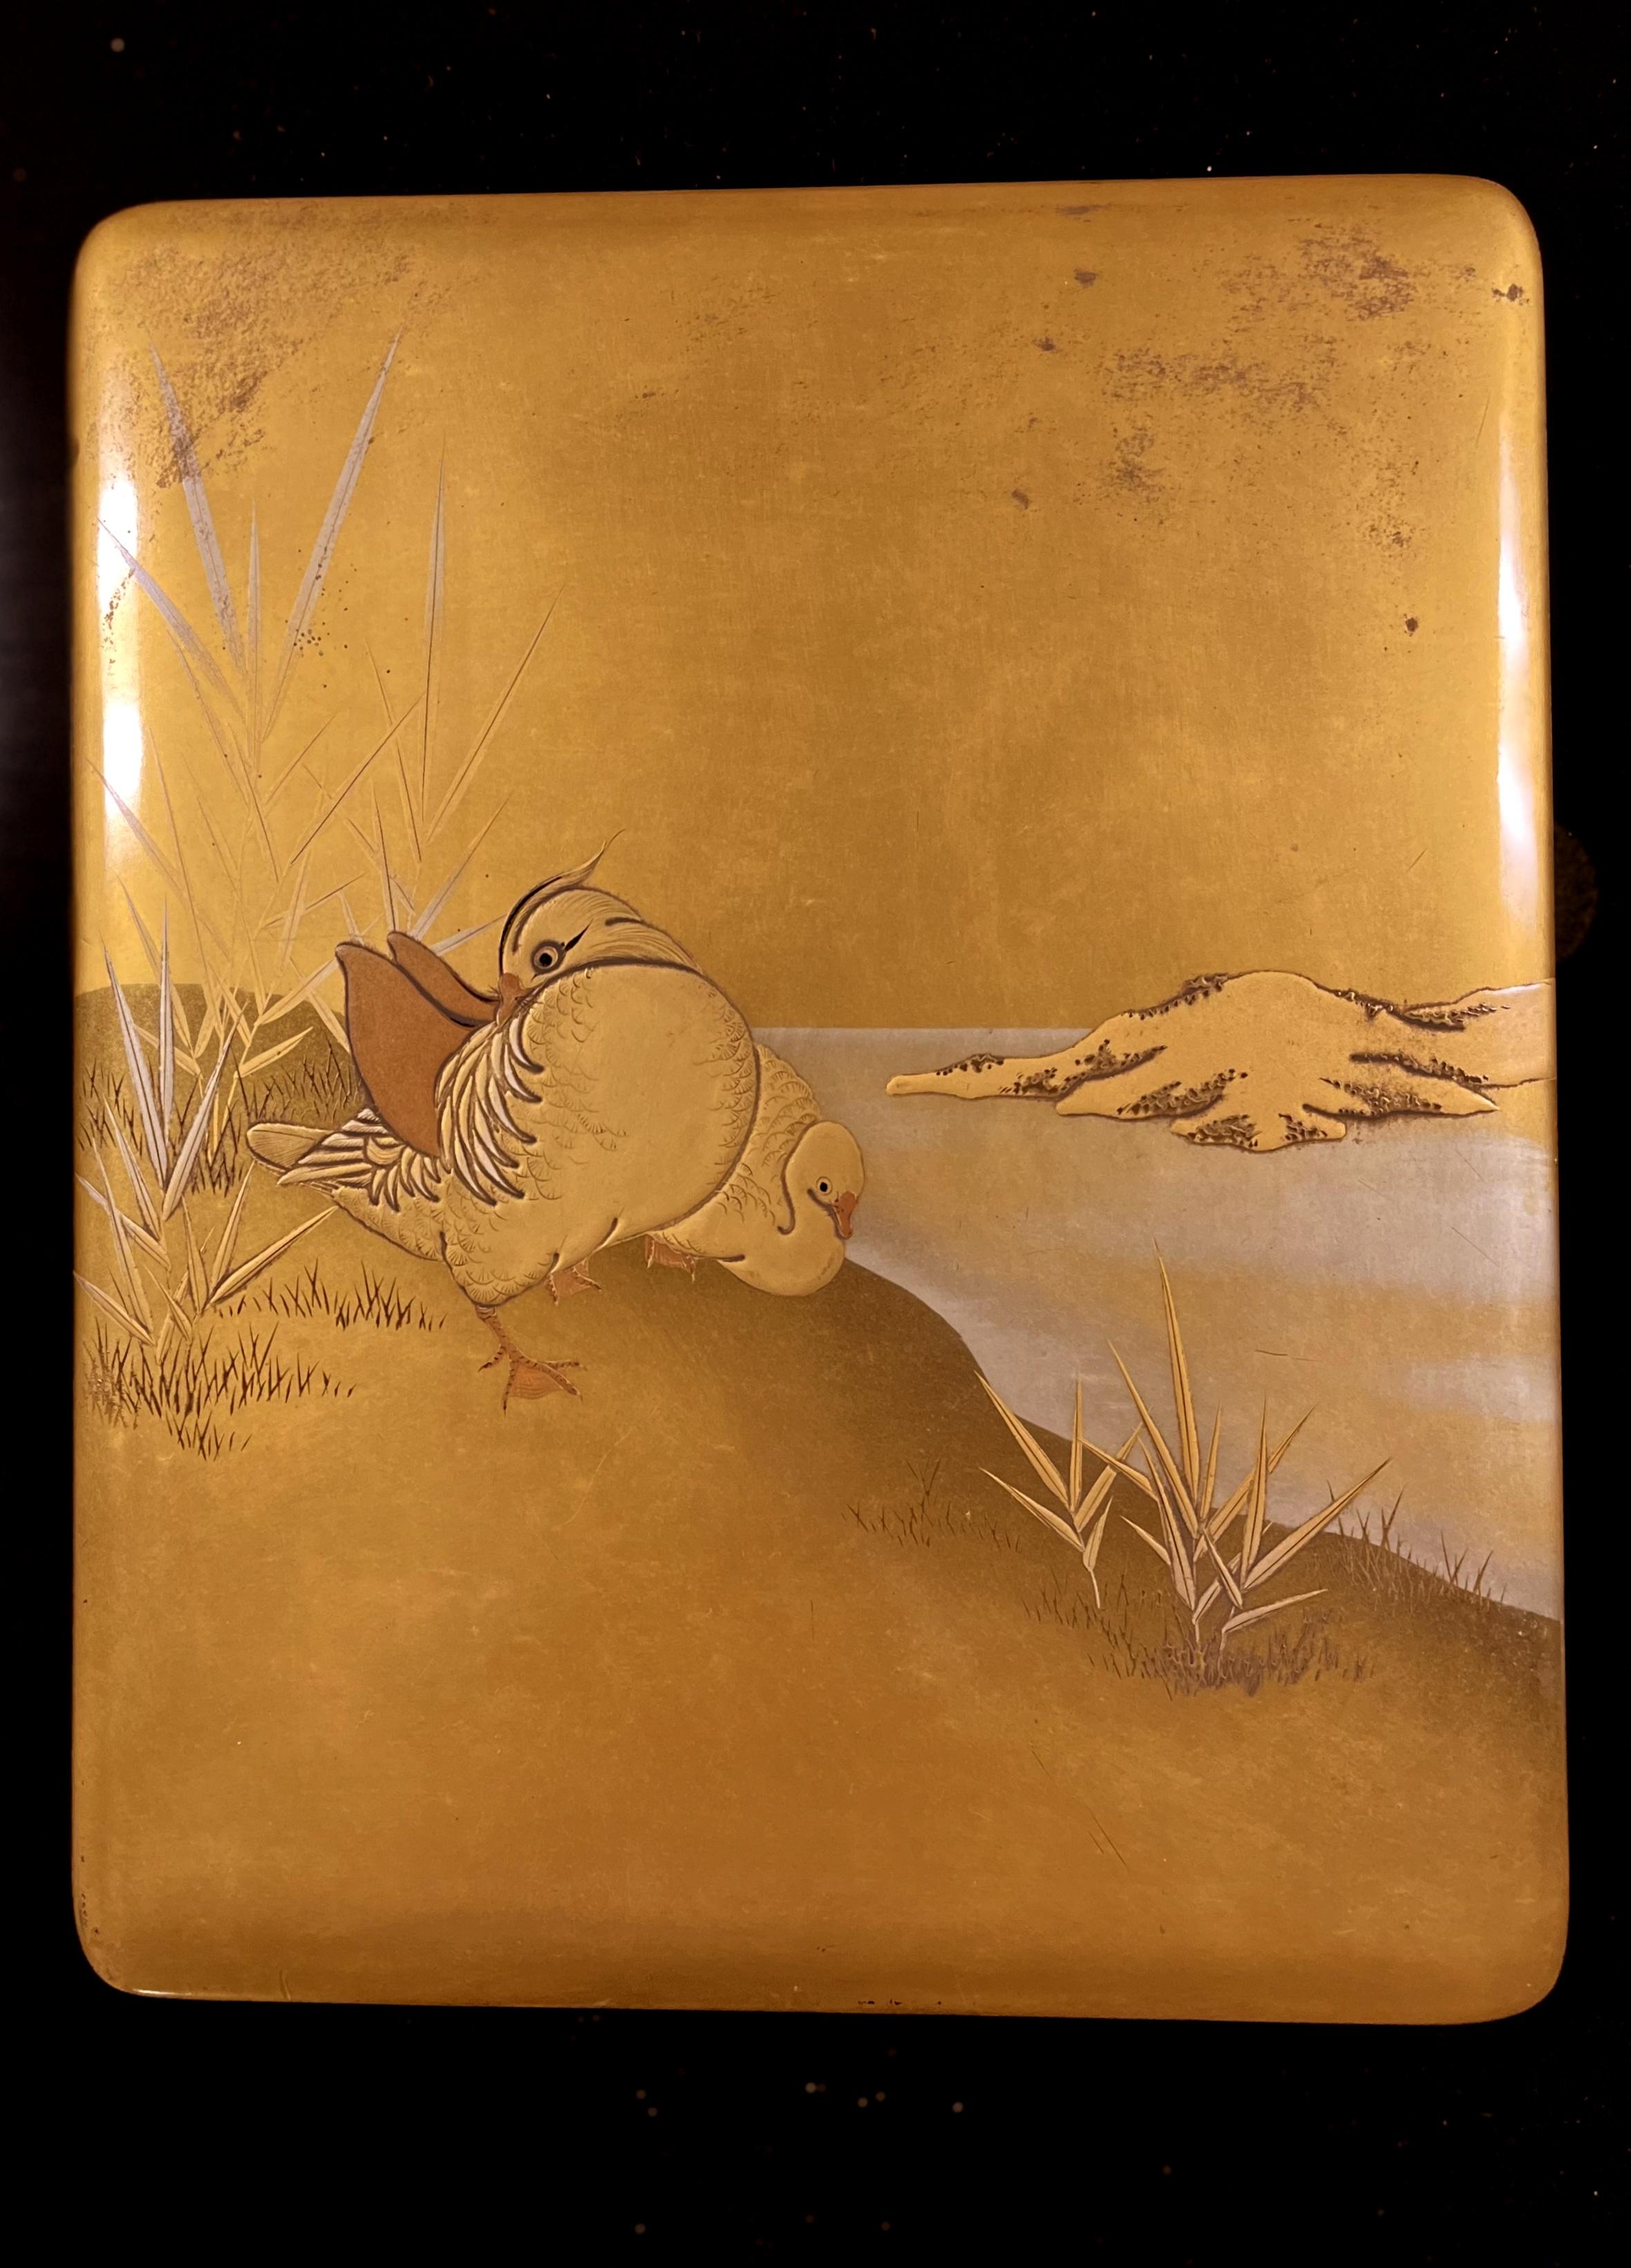 Japanese lacquer box with mandarin ducks motif on cover. One lacquer tray and one small lacquer plank inside the box.
 